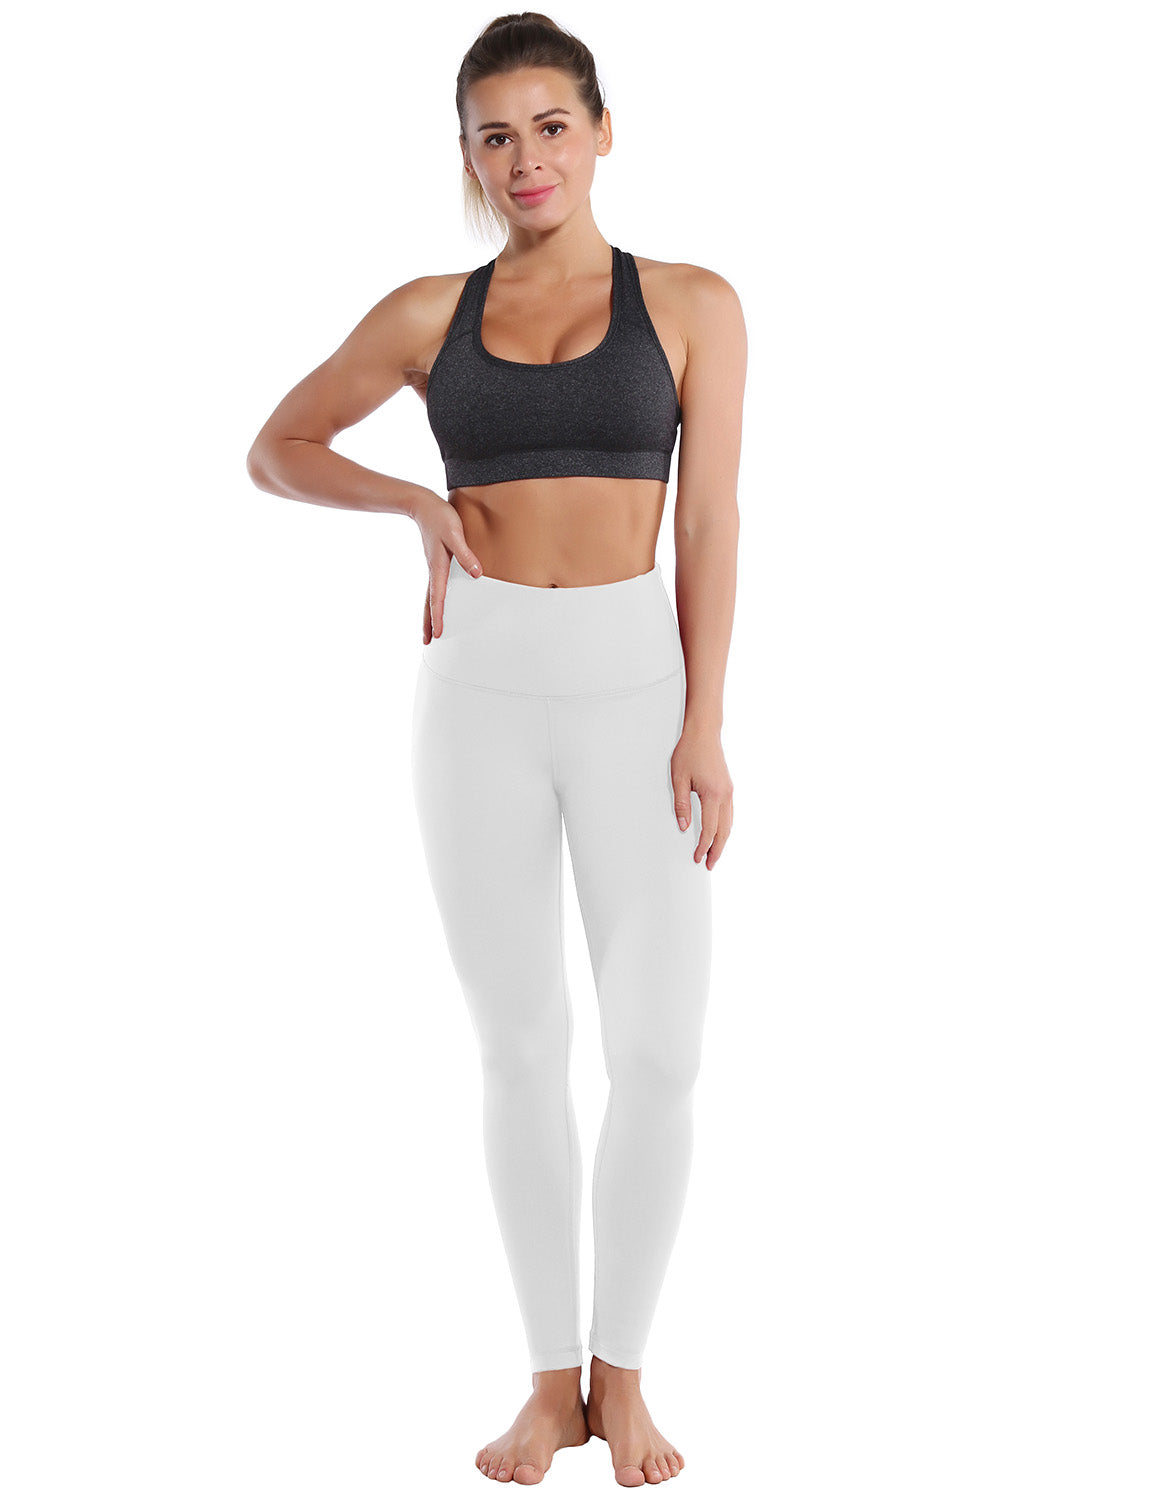 High Waist Yoga Pants white 75%Nylon/25%Spandex Fabric doesn't attract lint easily 4-way stretch No see-through Moisture-wicking Tummy control Inner pocket Four lengths